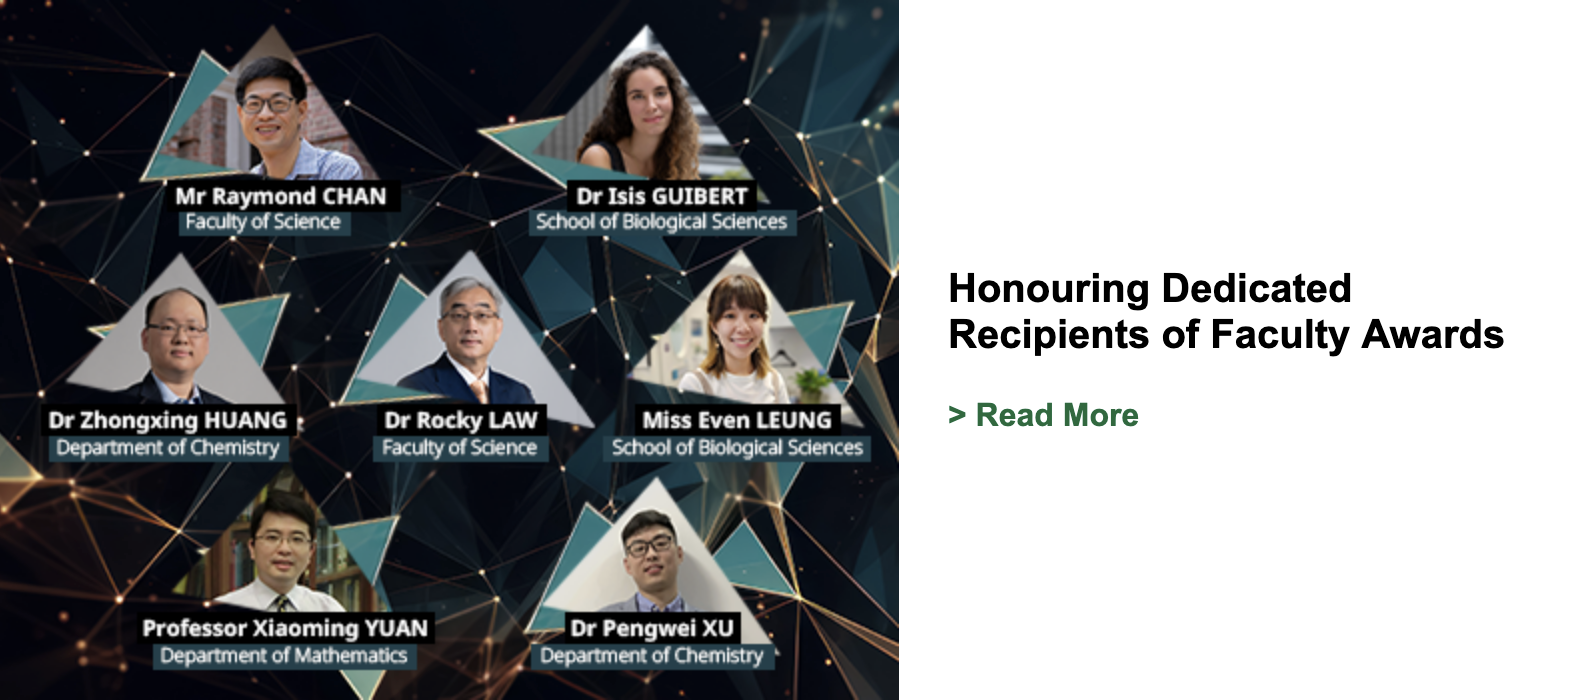 Honouring Dedicated Recipients of Faculty Awards